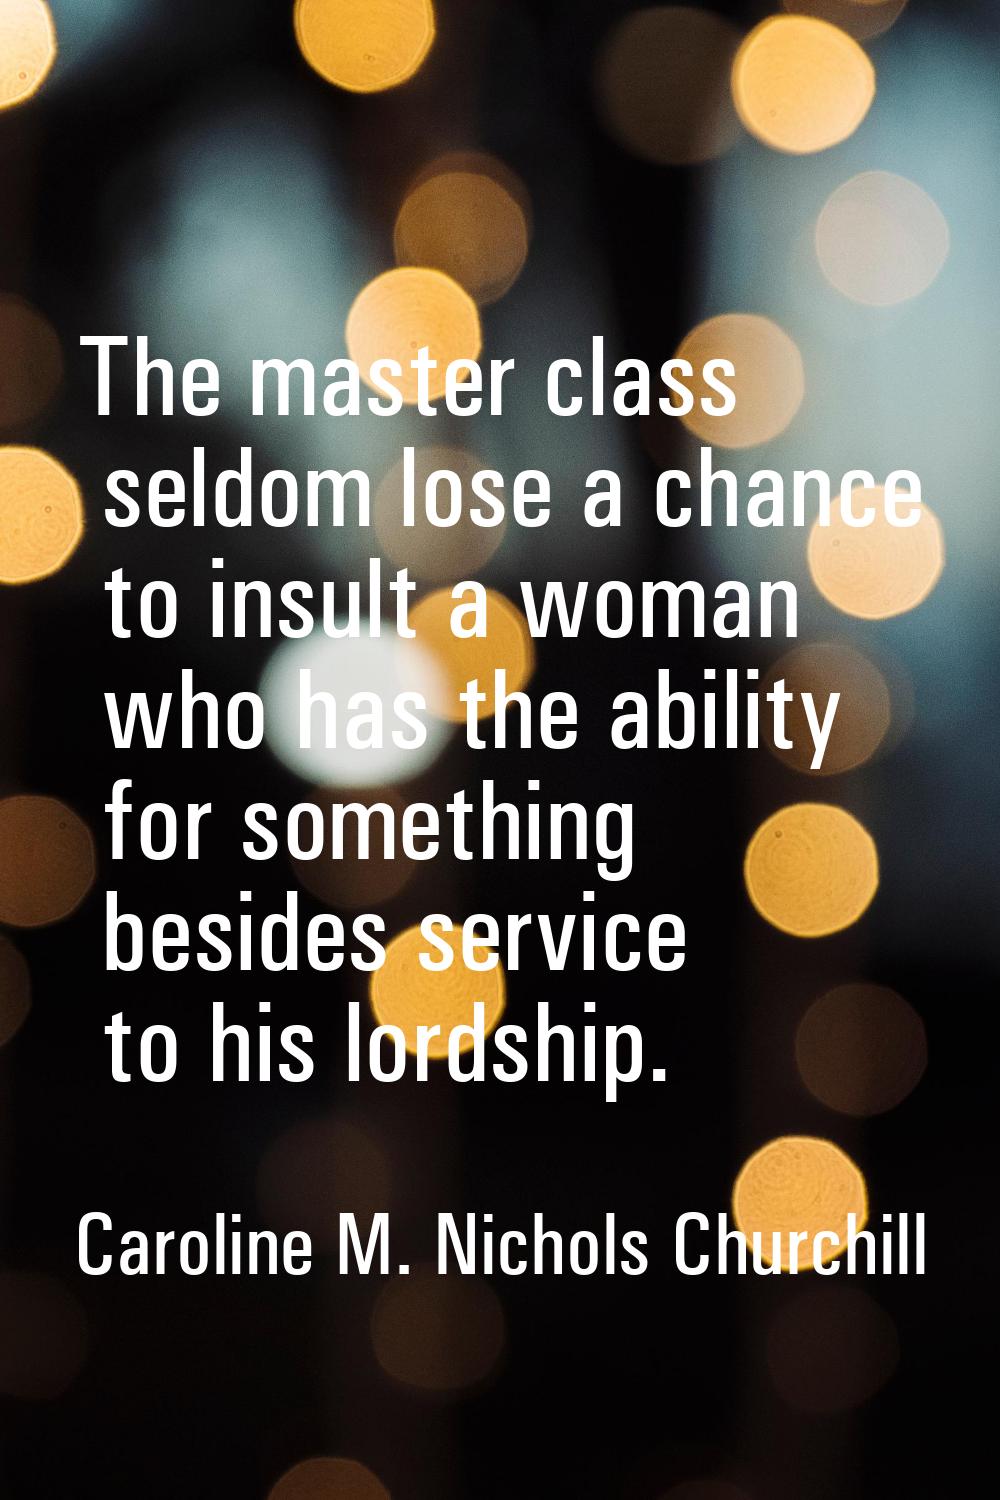 The master class seldom lose a chance to insult a woman who has the ability for something besides s